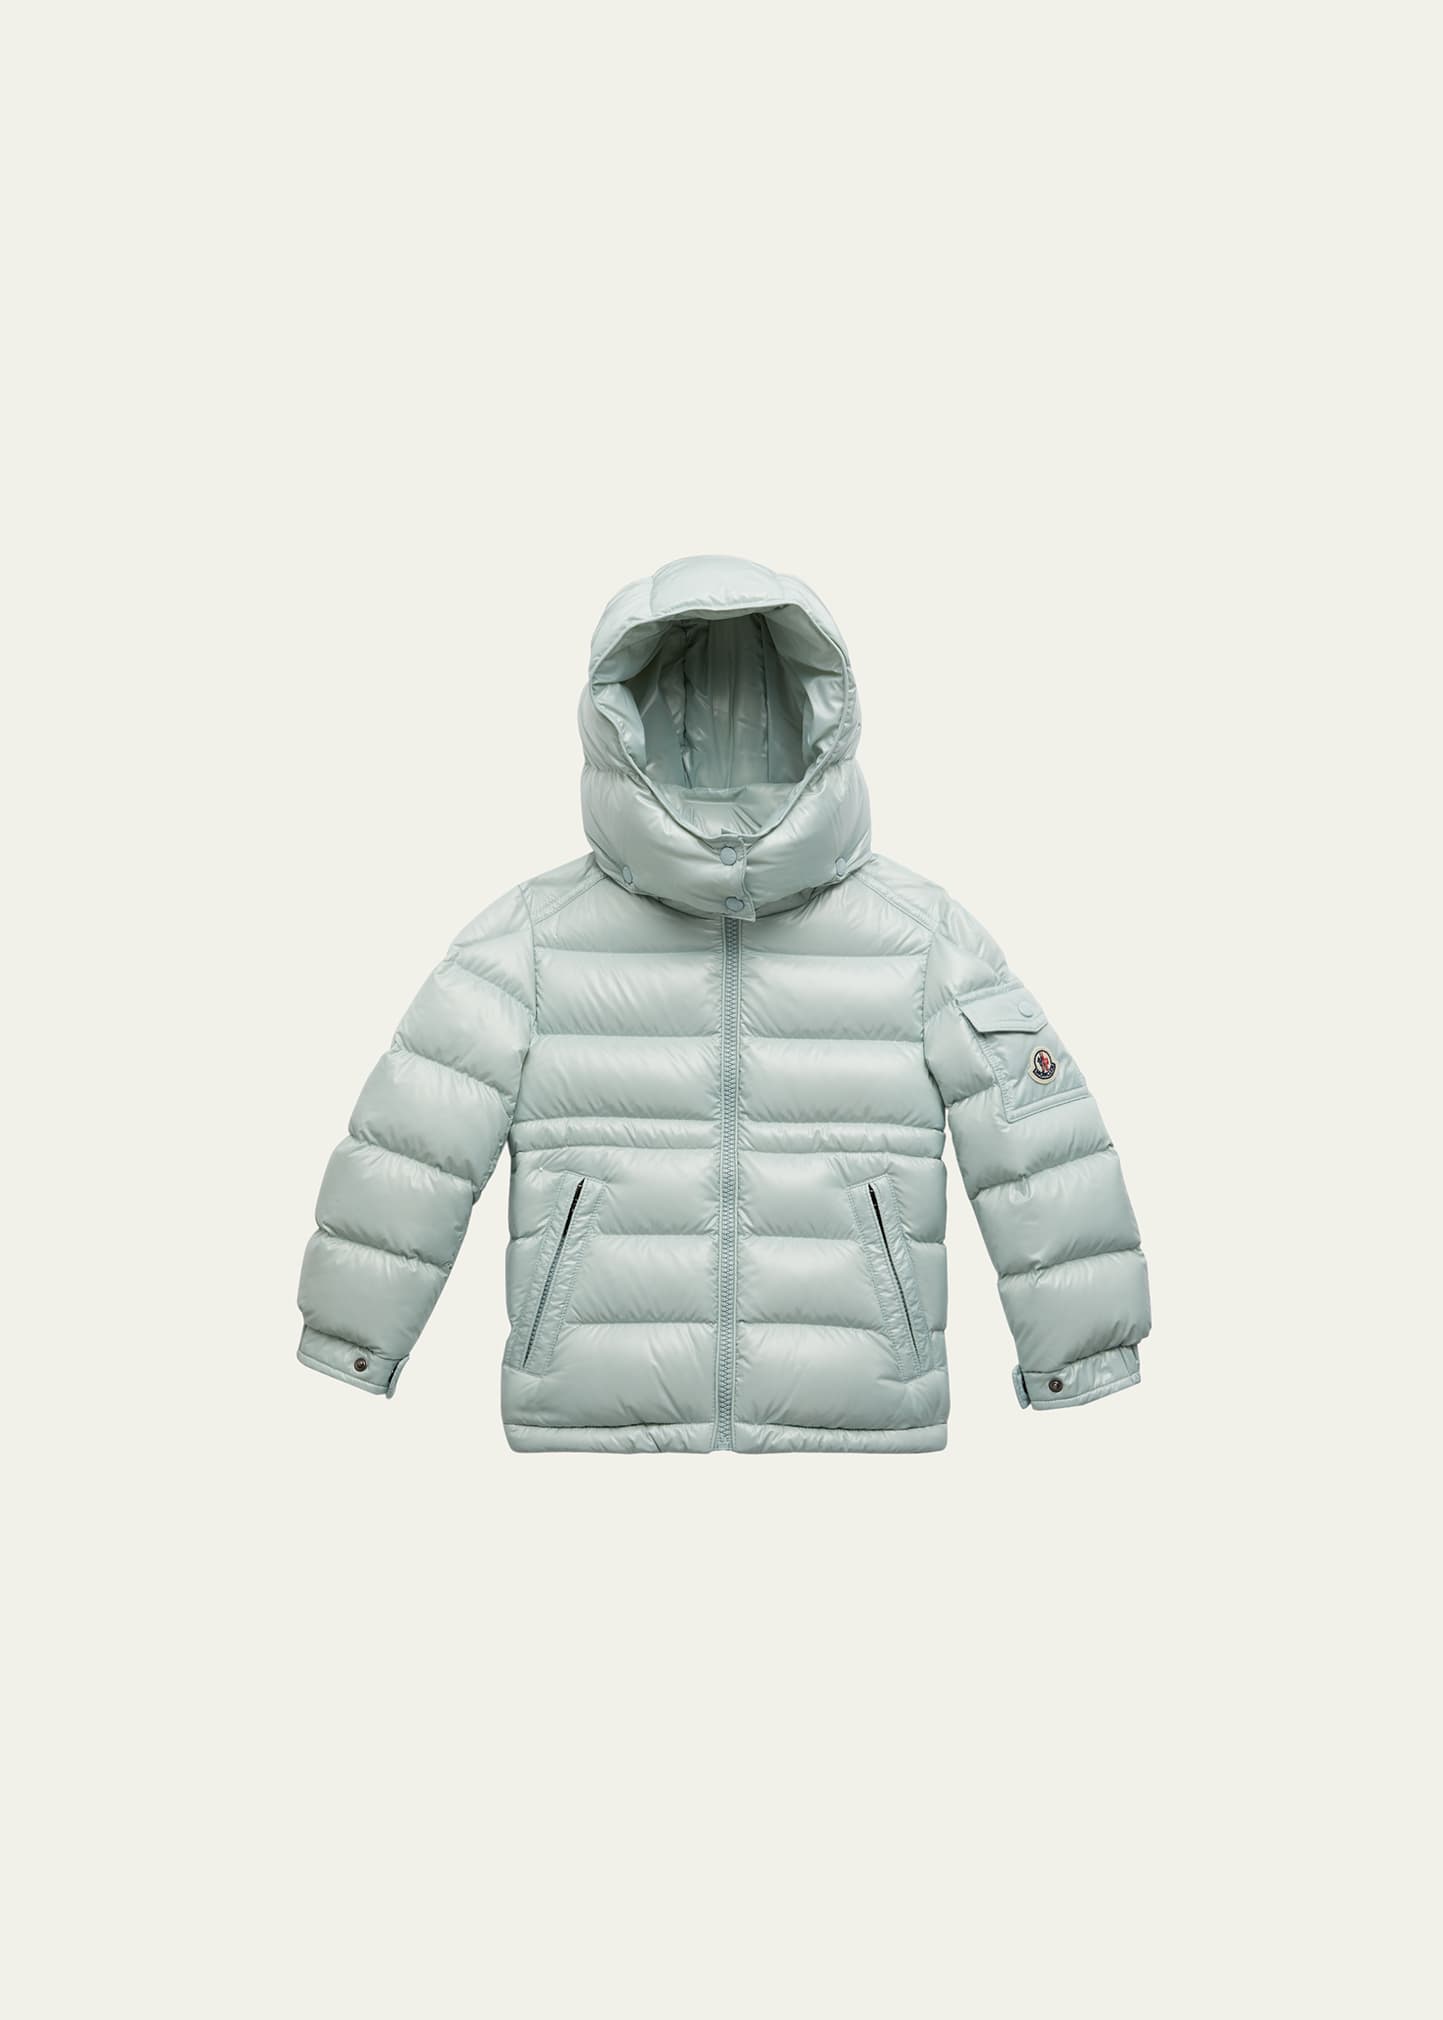 Moncler Kids' Girl's Marie Puffer Jacket In Bright Blue